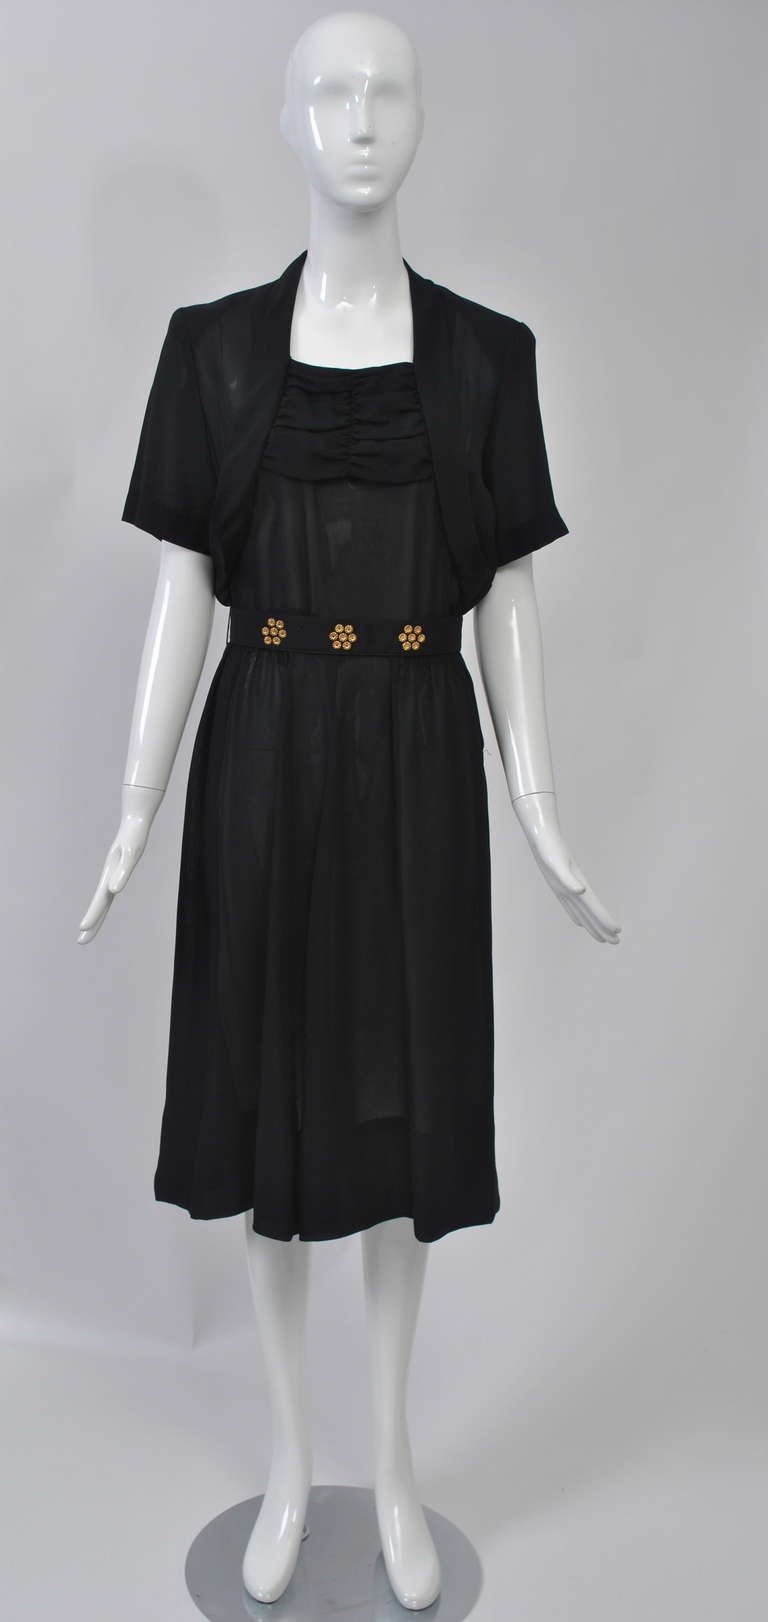 Black 1940s dress in a slightly sheer fabric, possibly rayon. The bodice, with short sleeves, has a bolero-like effect and shirring across the top. The gently shirred skirt falls softly. A belt that snaps in back has clusters of gold studs.